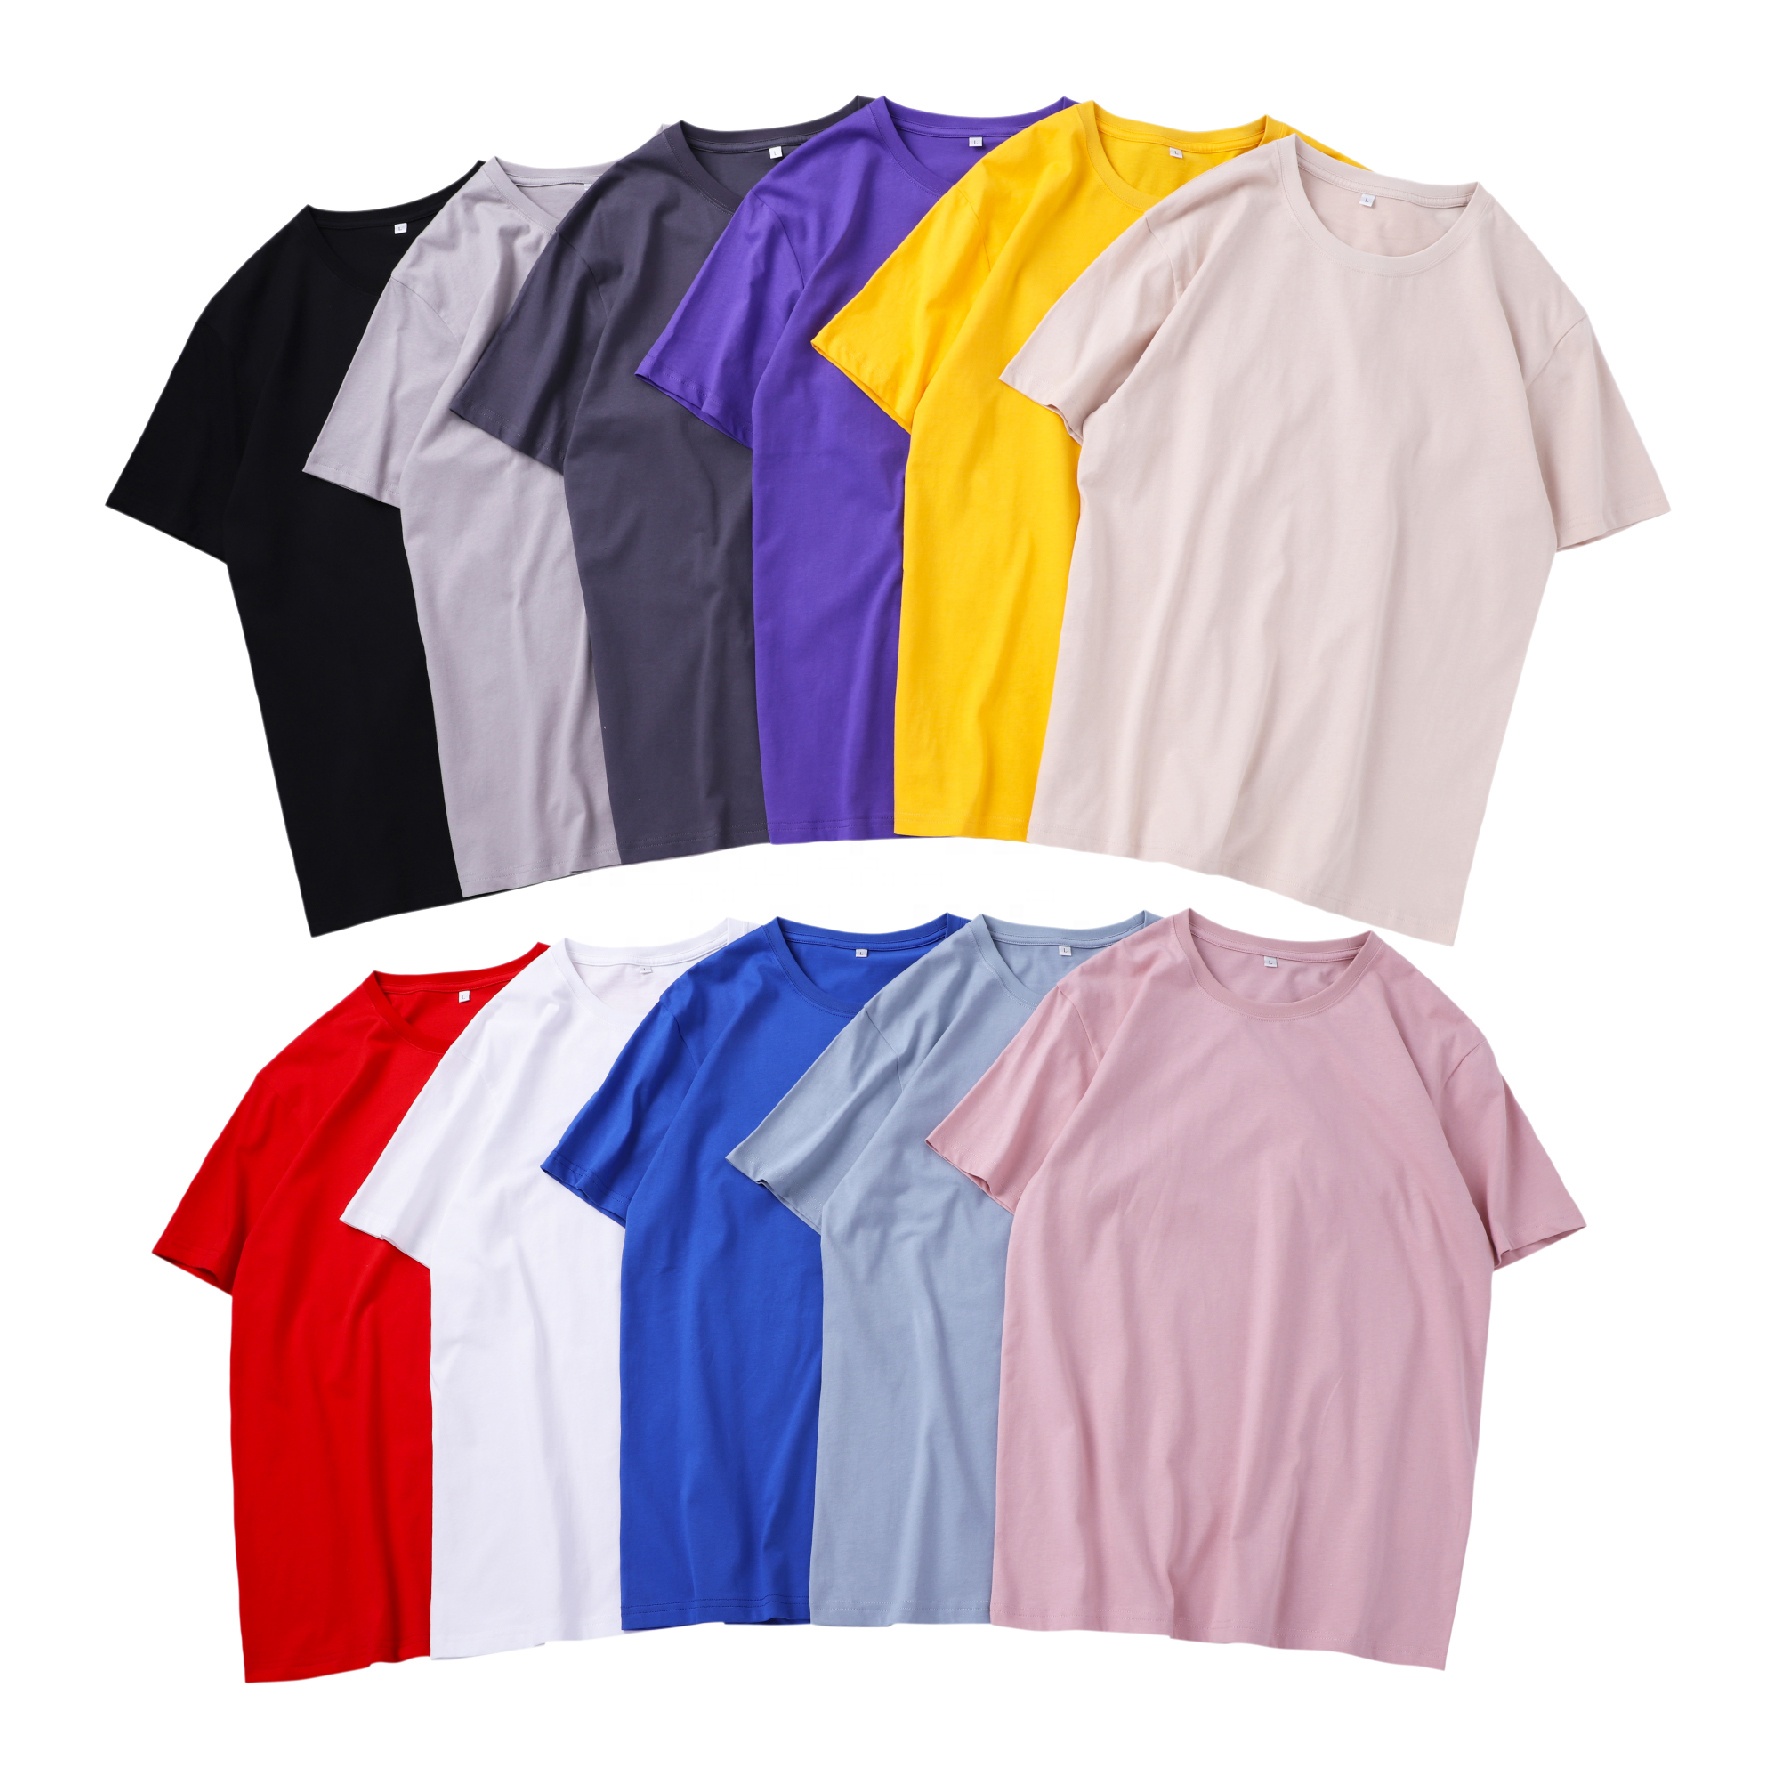 china apparel new style clothing men's o neck high quality plain blank t shirts